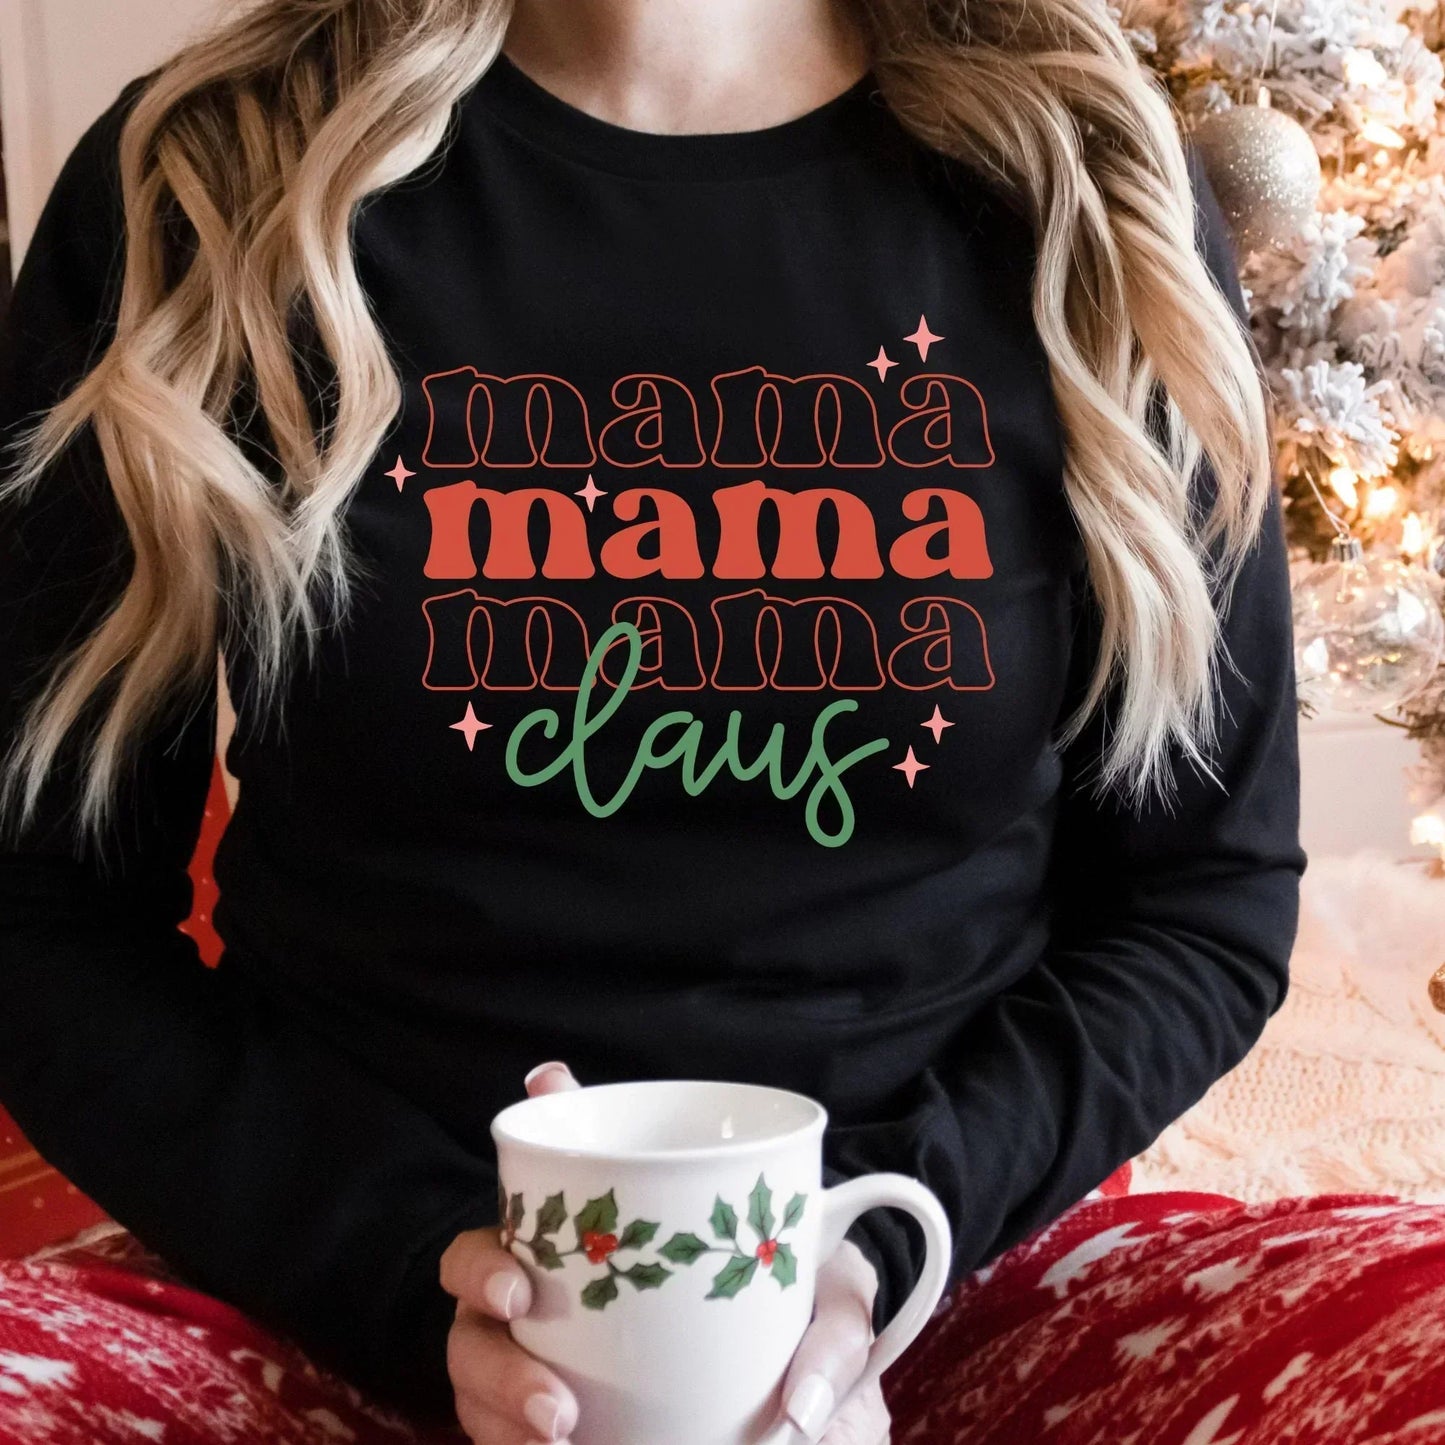 Christmas Family Shirts, Funny Christmas Couples T-shirt, Cookie Baking Crew Xmas Tee, Matching Family Holiday Photos, Merry Christmas Gifts HMDesignStudioUS